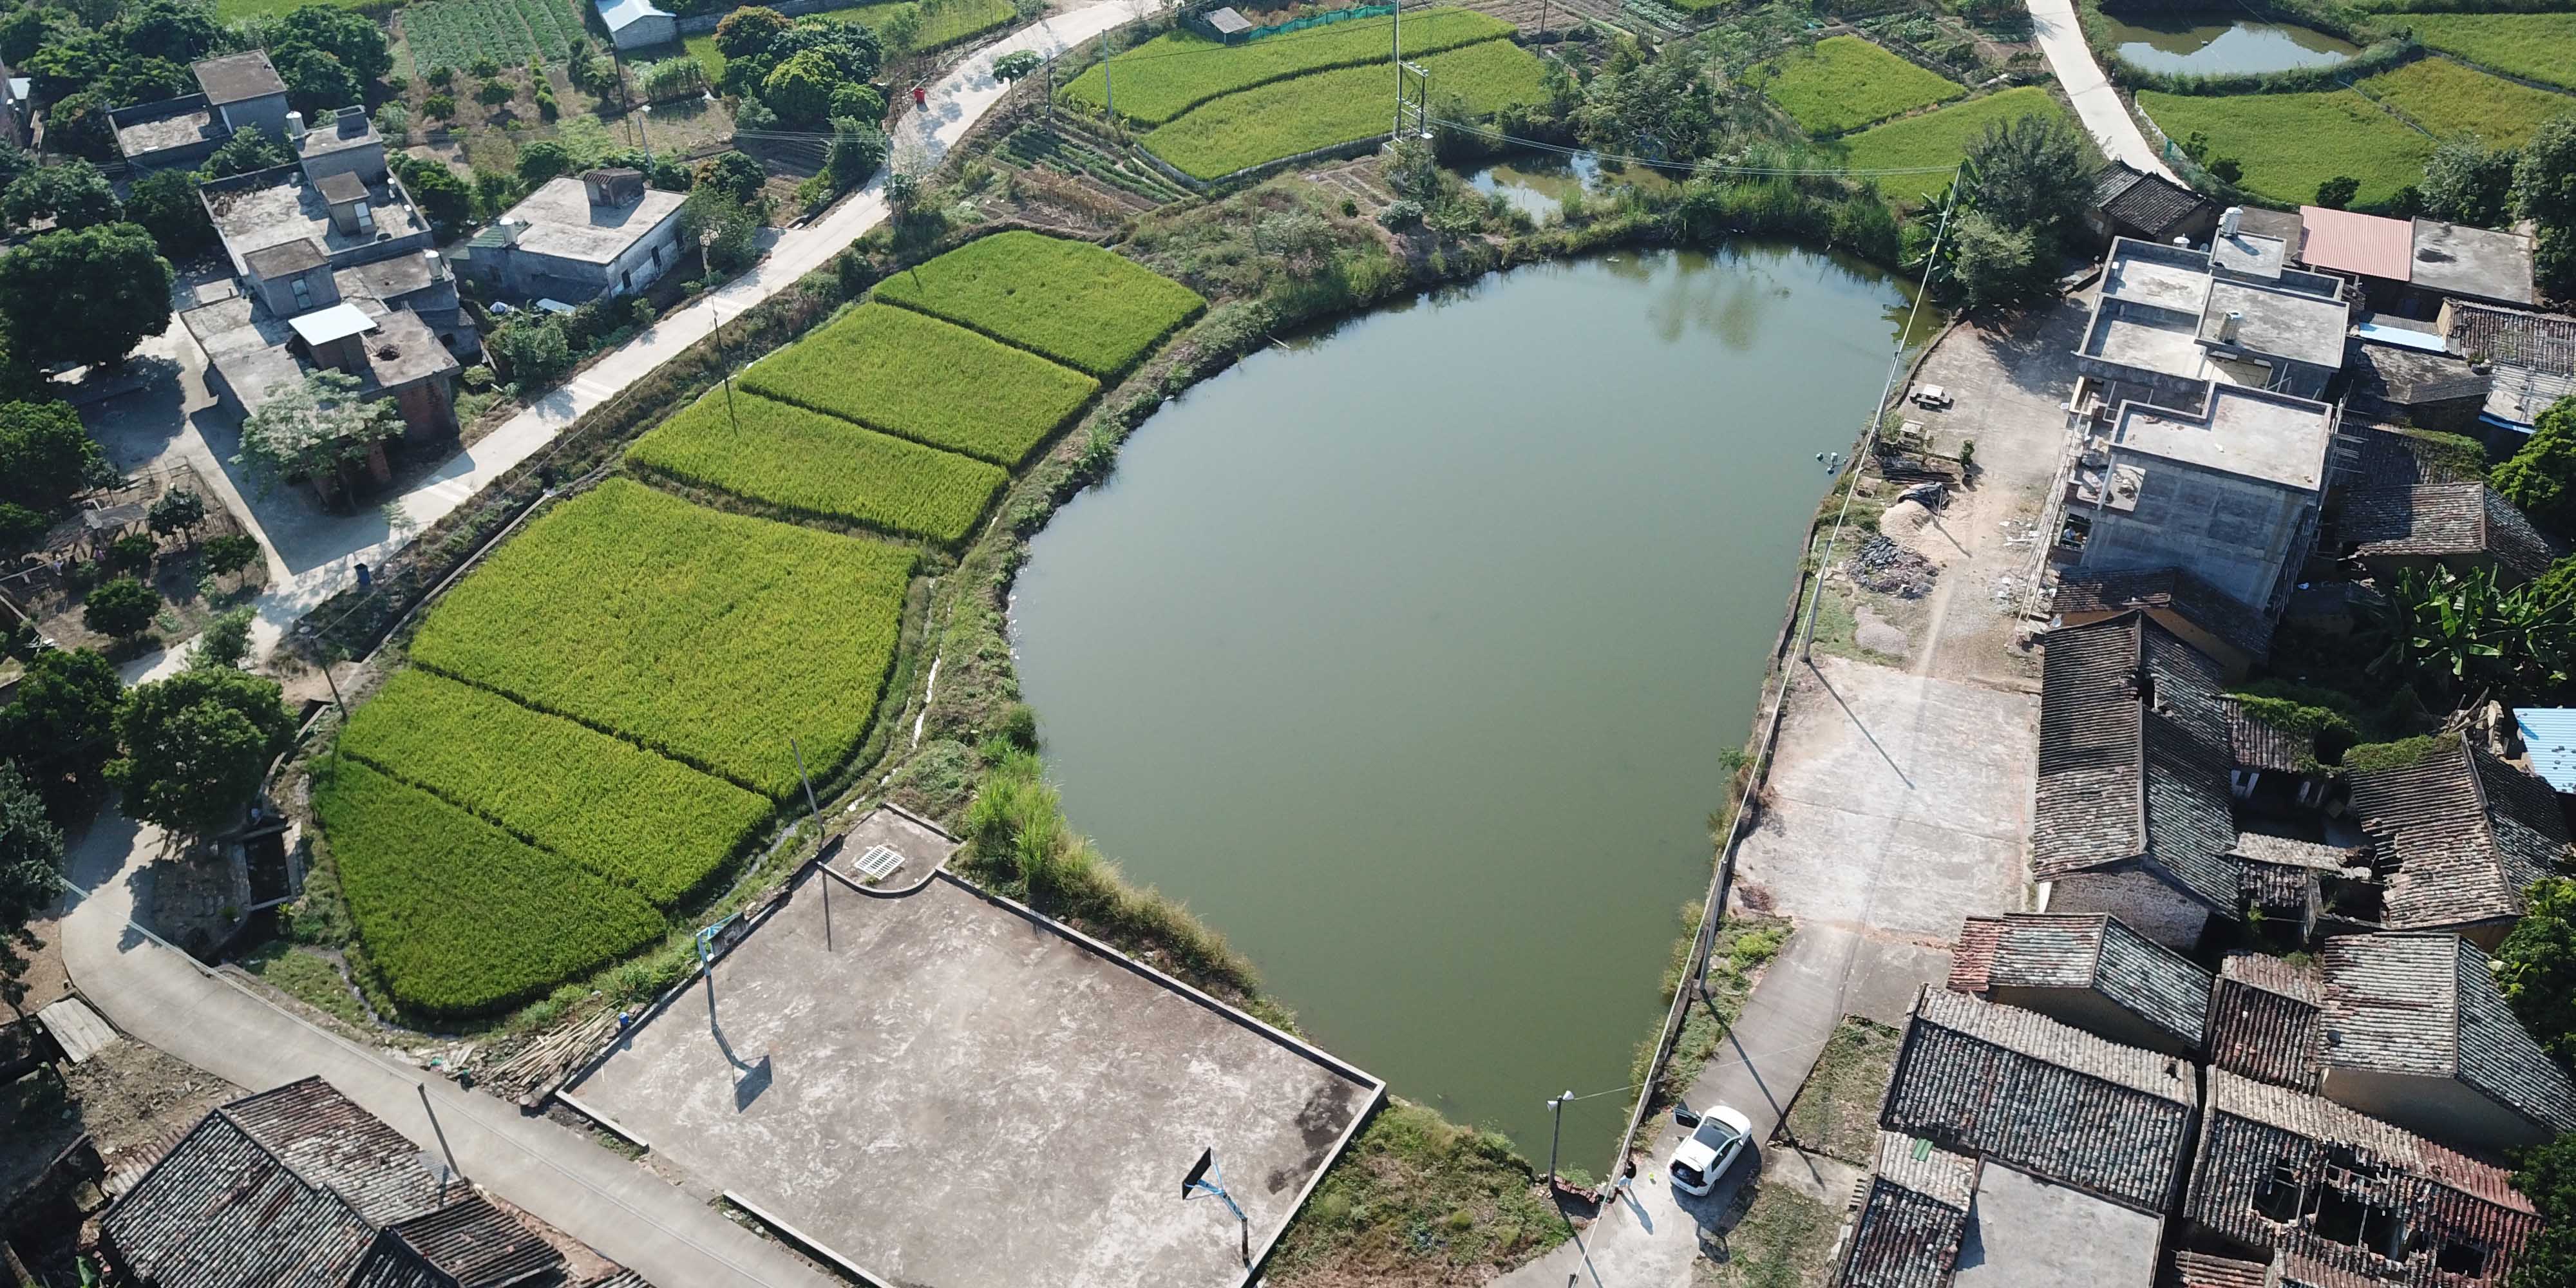 Water Pollution Control Planning of Yonghan Town Area in Longmen County